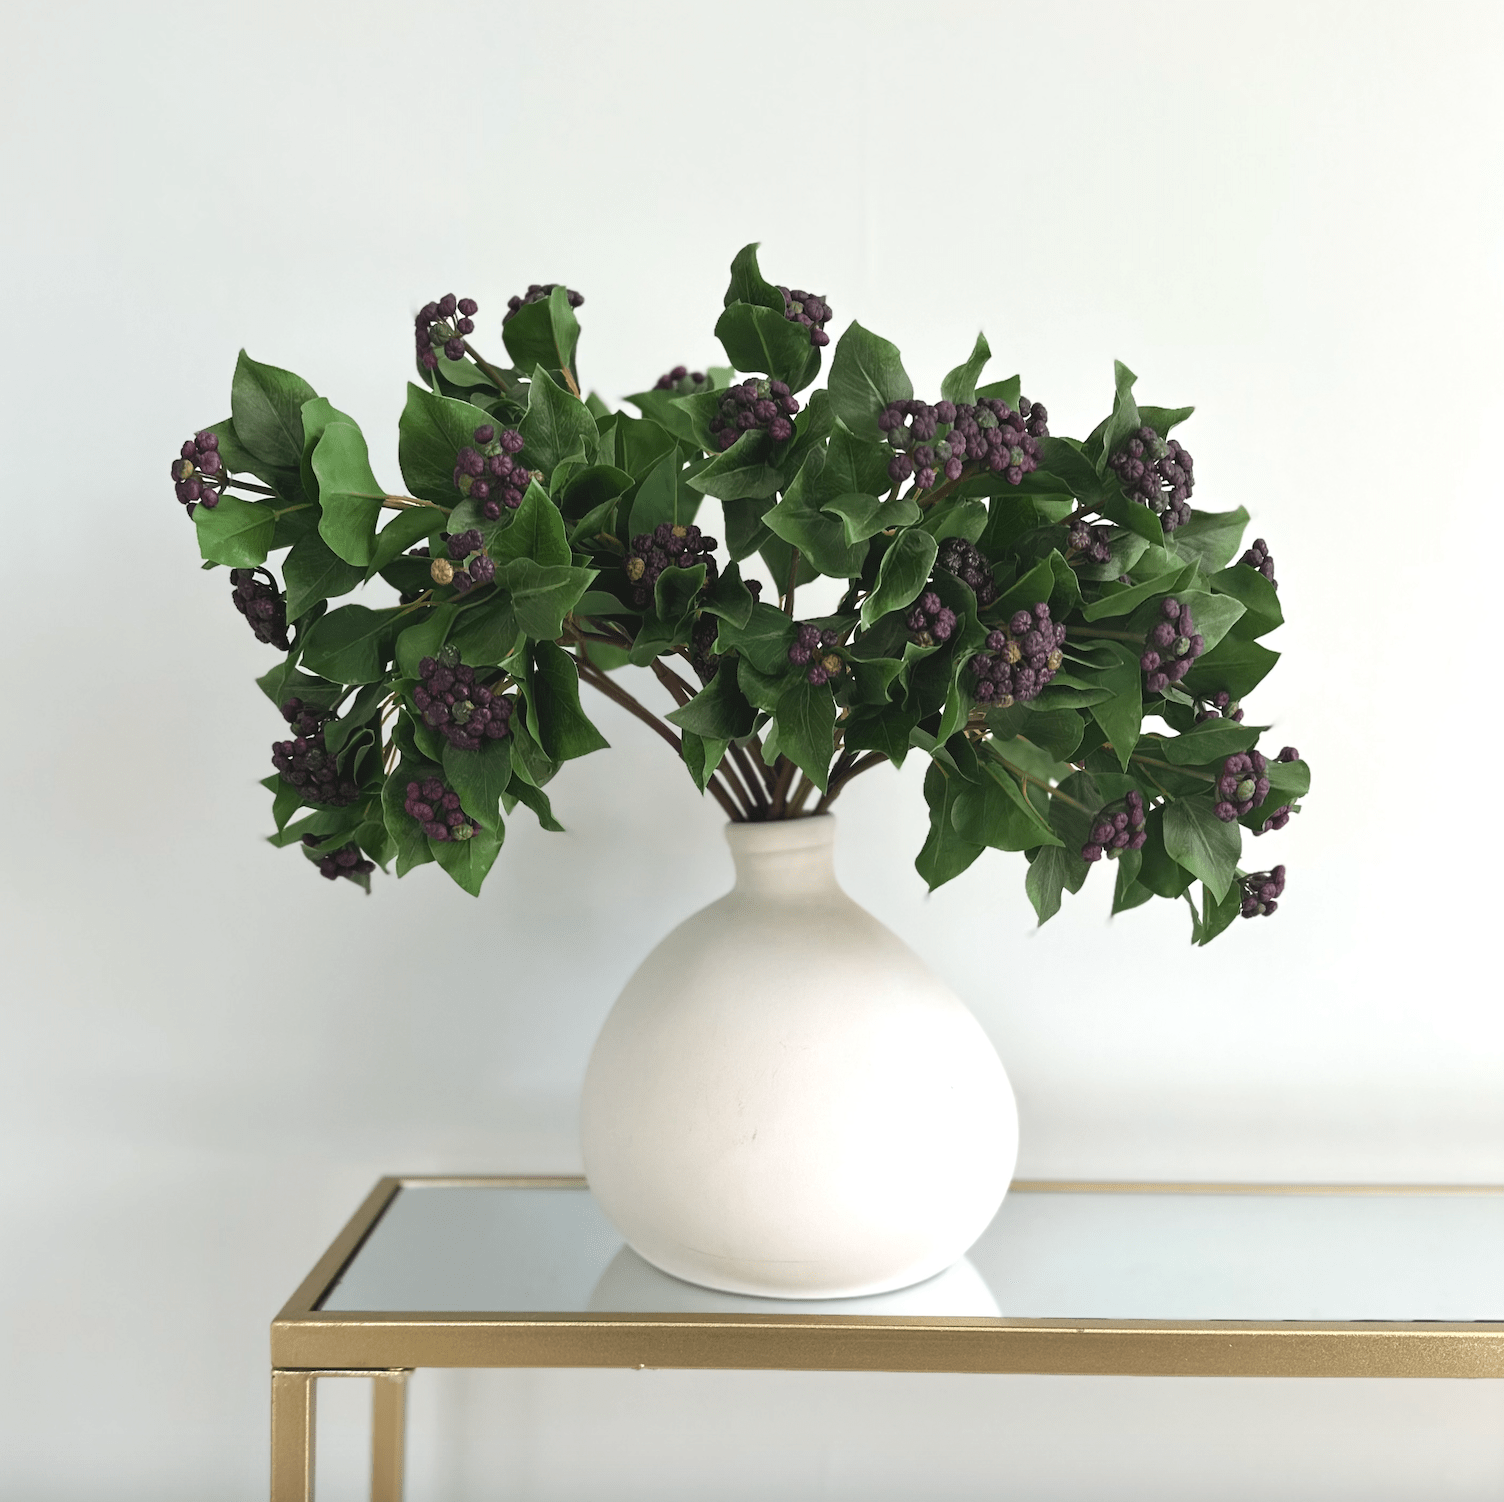 luxury artificial fake silk flowers green ivy leaf greenery foliage with purple berries lifelike realistic faux flowers buy online from The Faux Flower Company ABY1017PU